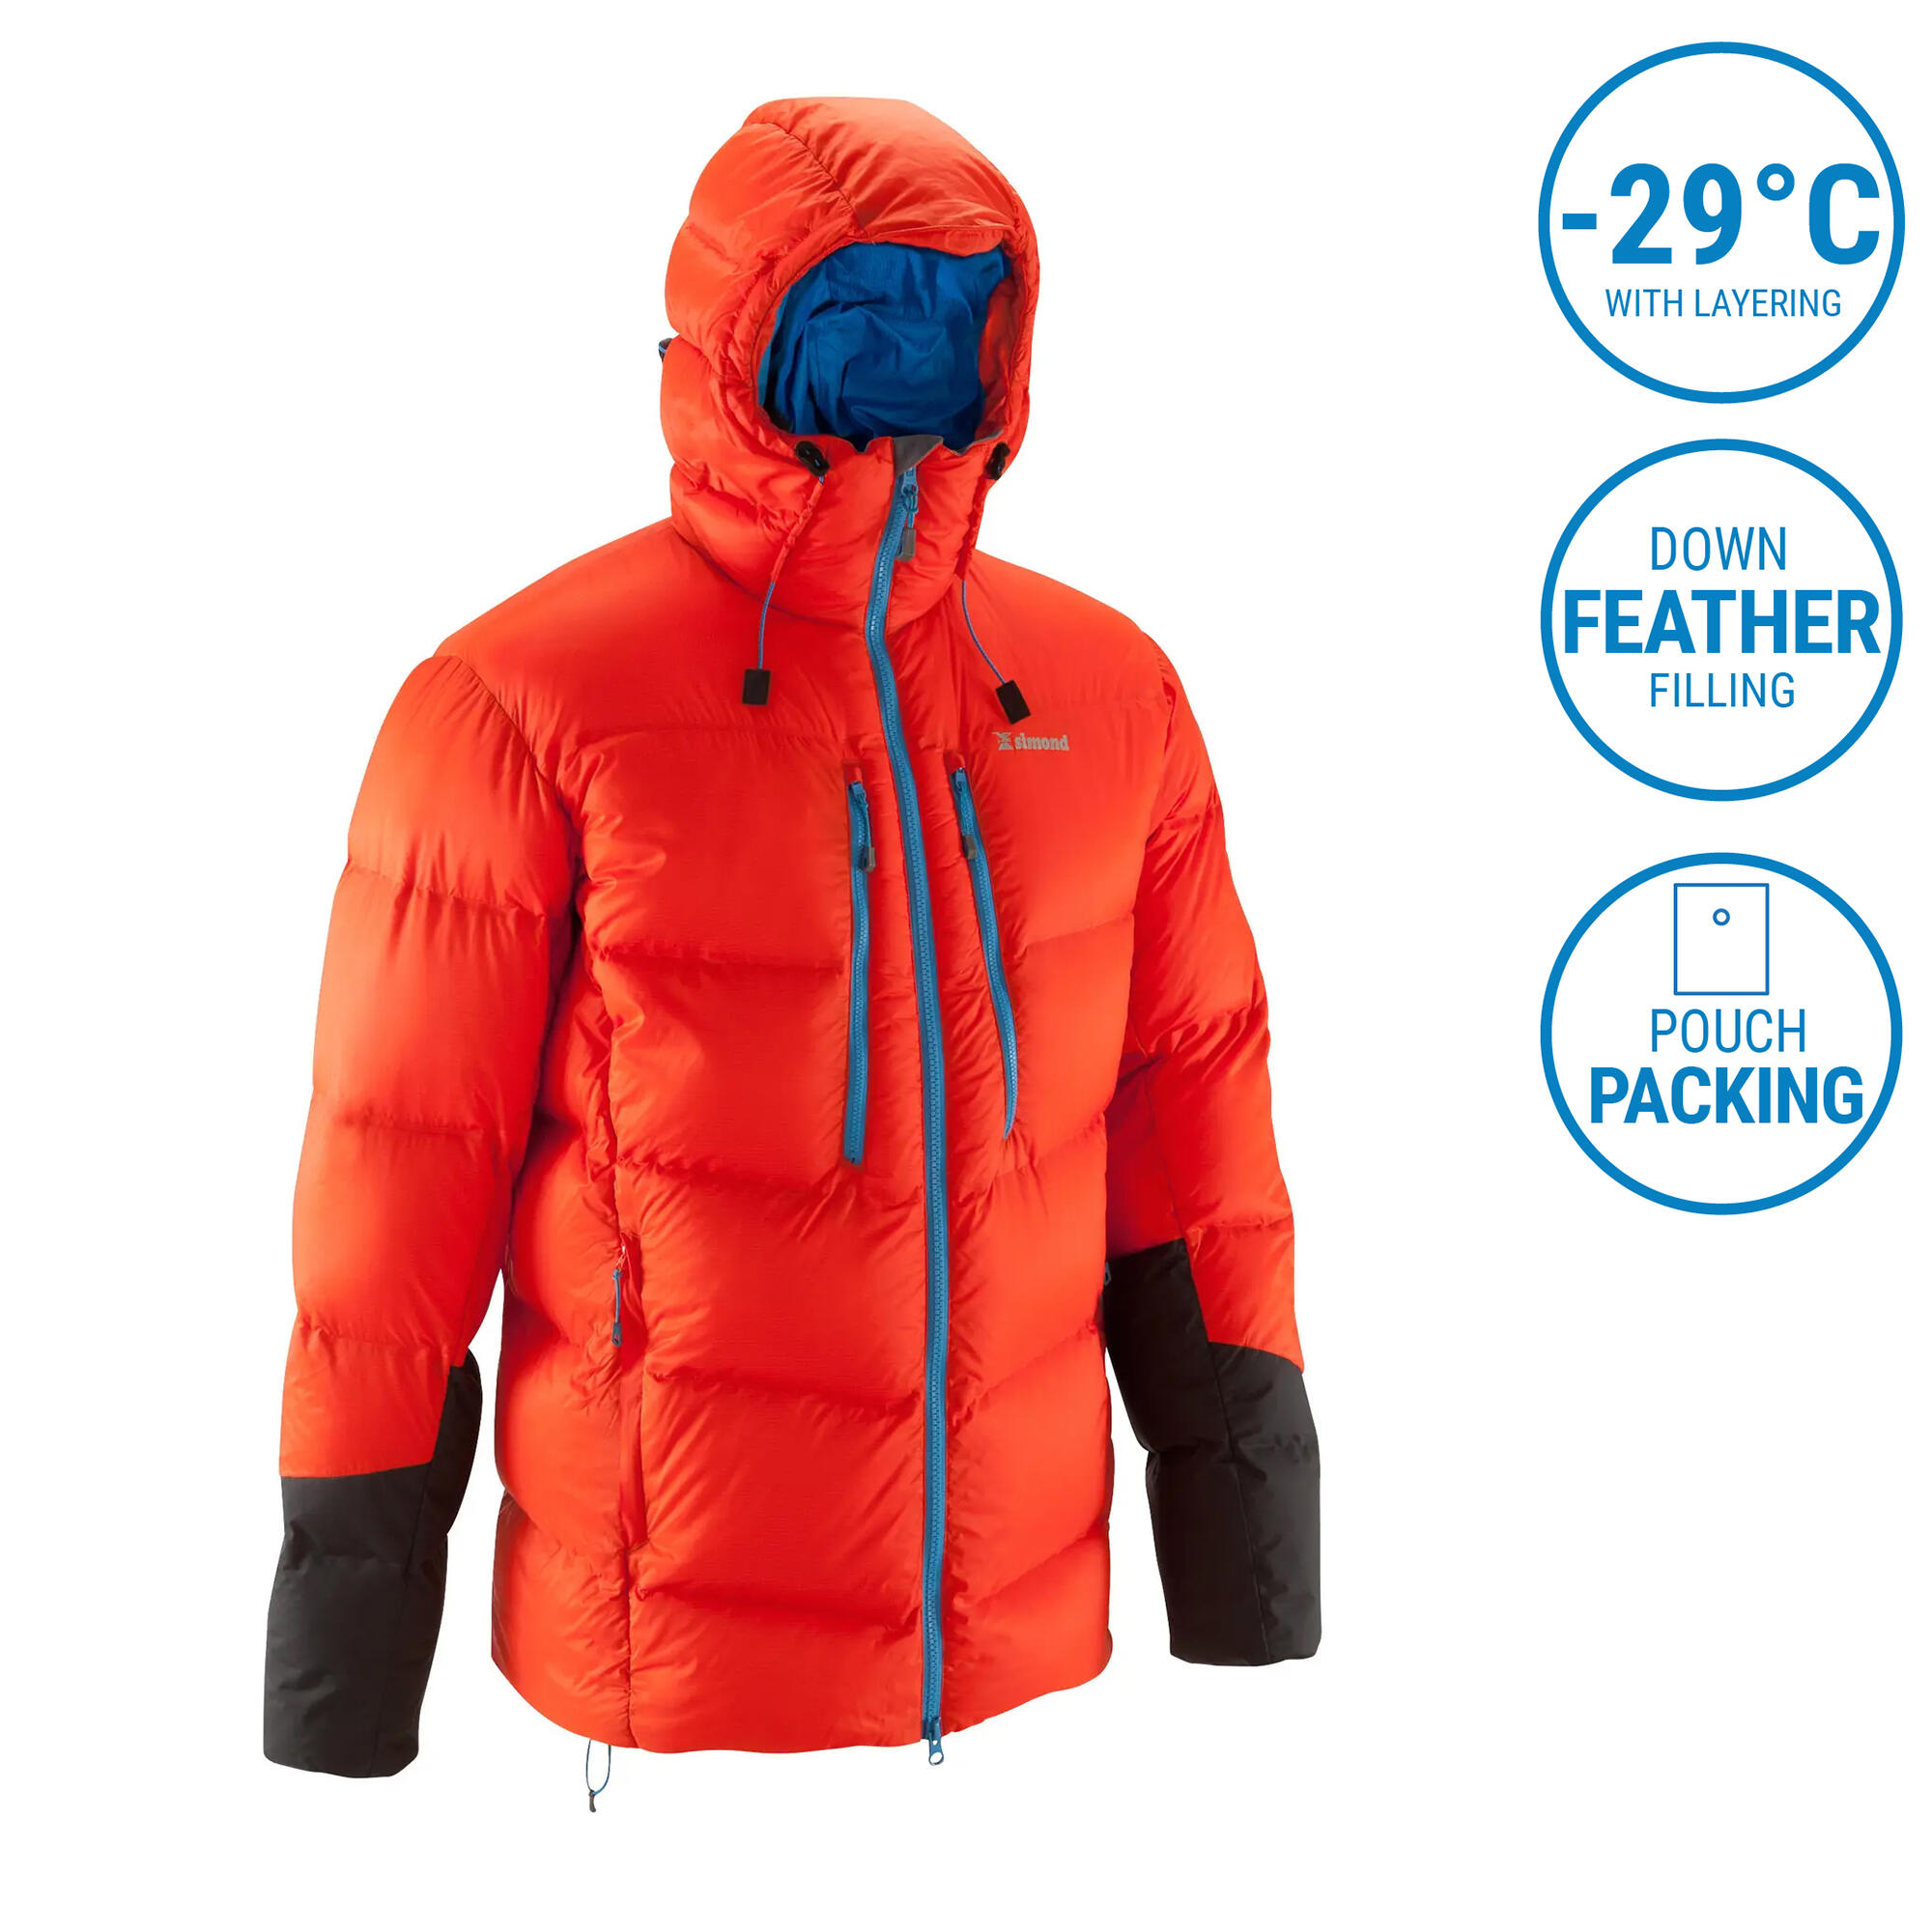 Kids' Waterproof Hiking Jacket - MH150 Aged 7-15 - Red By Decathlon